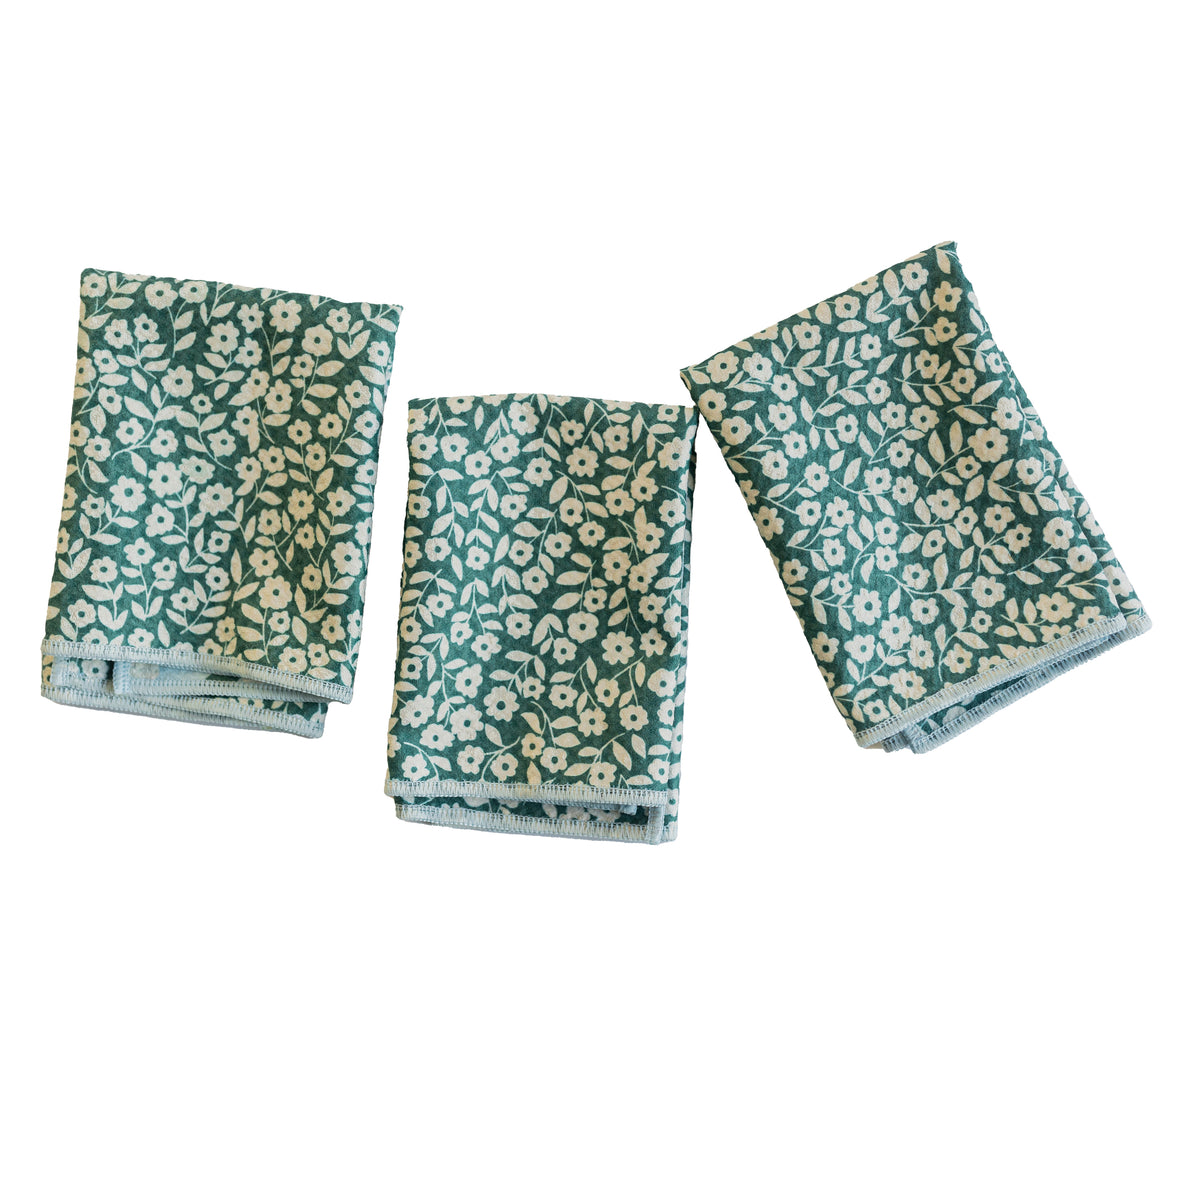 Mighty Mini Towel (Set of 3) - Nuthatch Birdsong kitchen towels Once Again Home Co.   